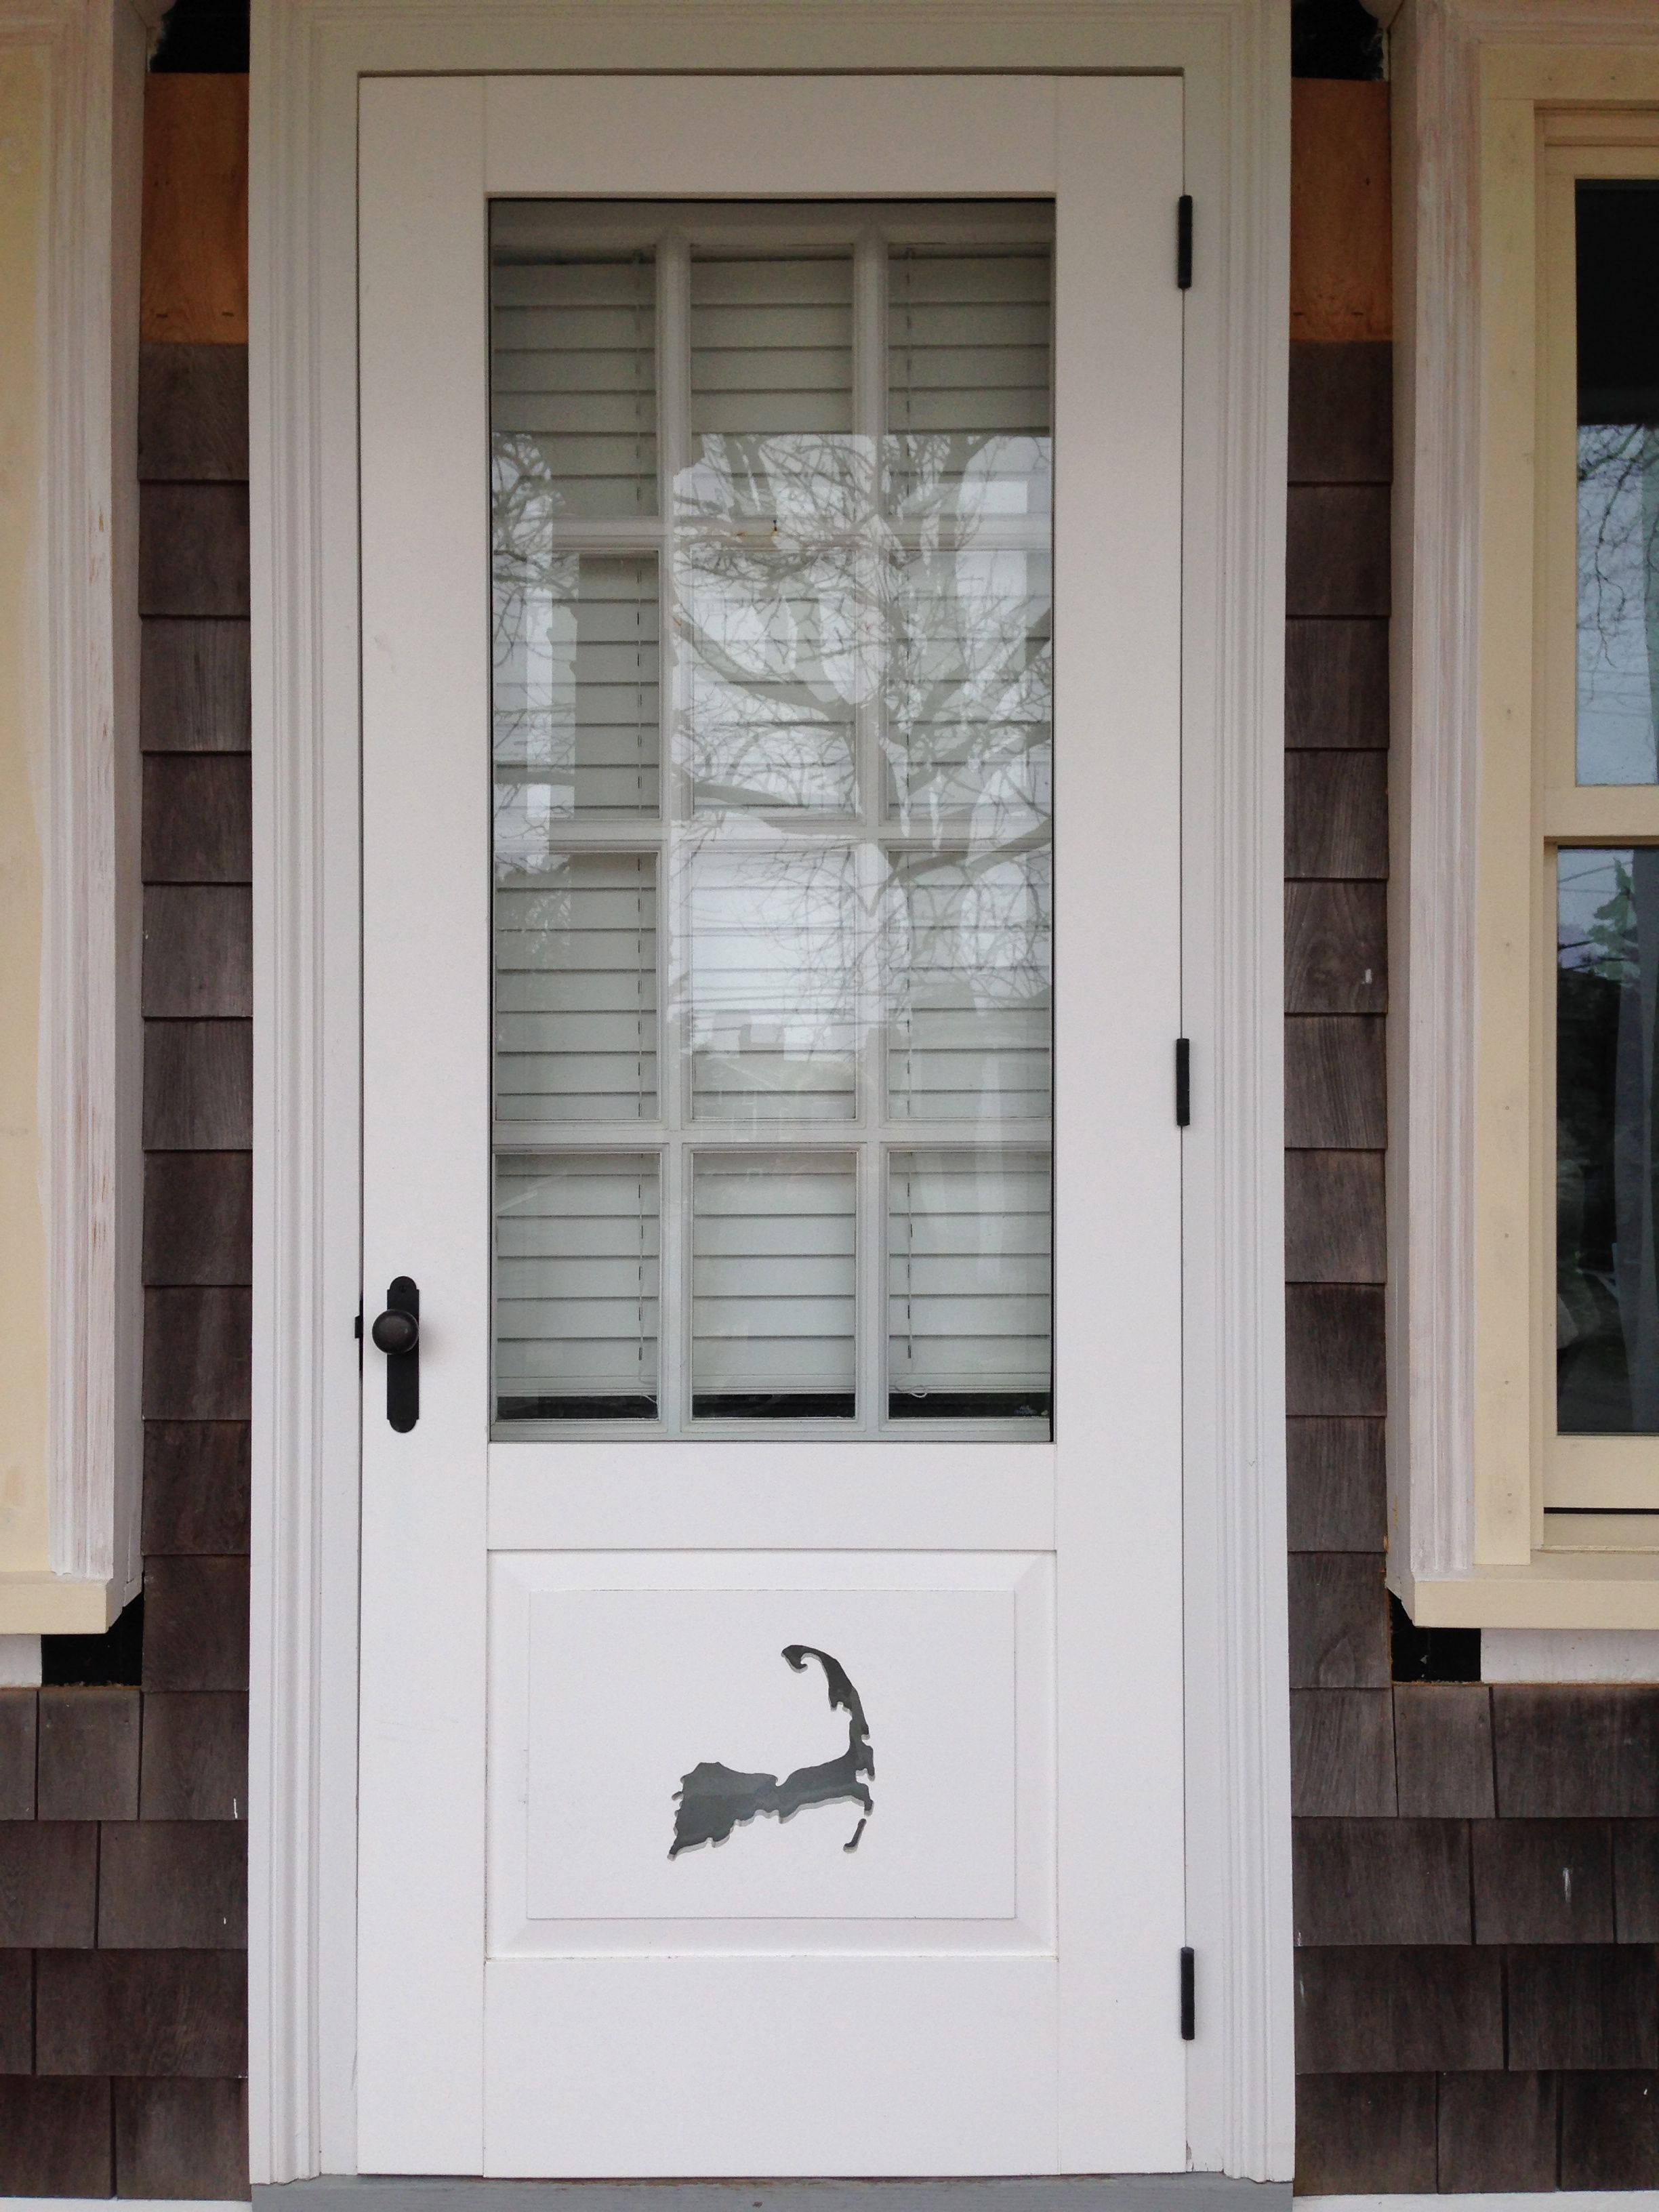 Seaport Shutter Companys Custom Mahogany Screenstorm Door With Our pertaining to size 2448 X 3264